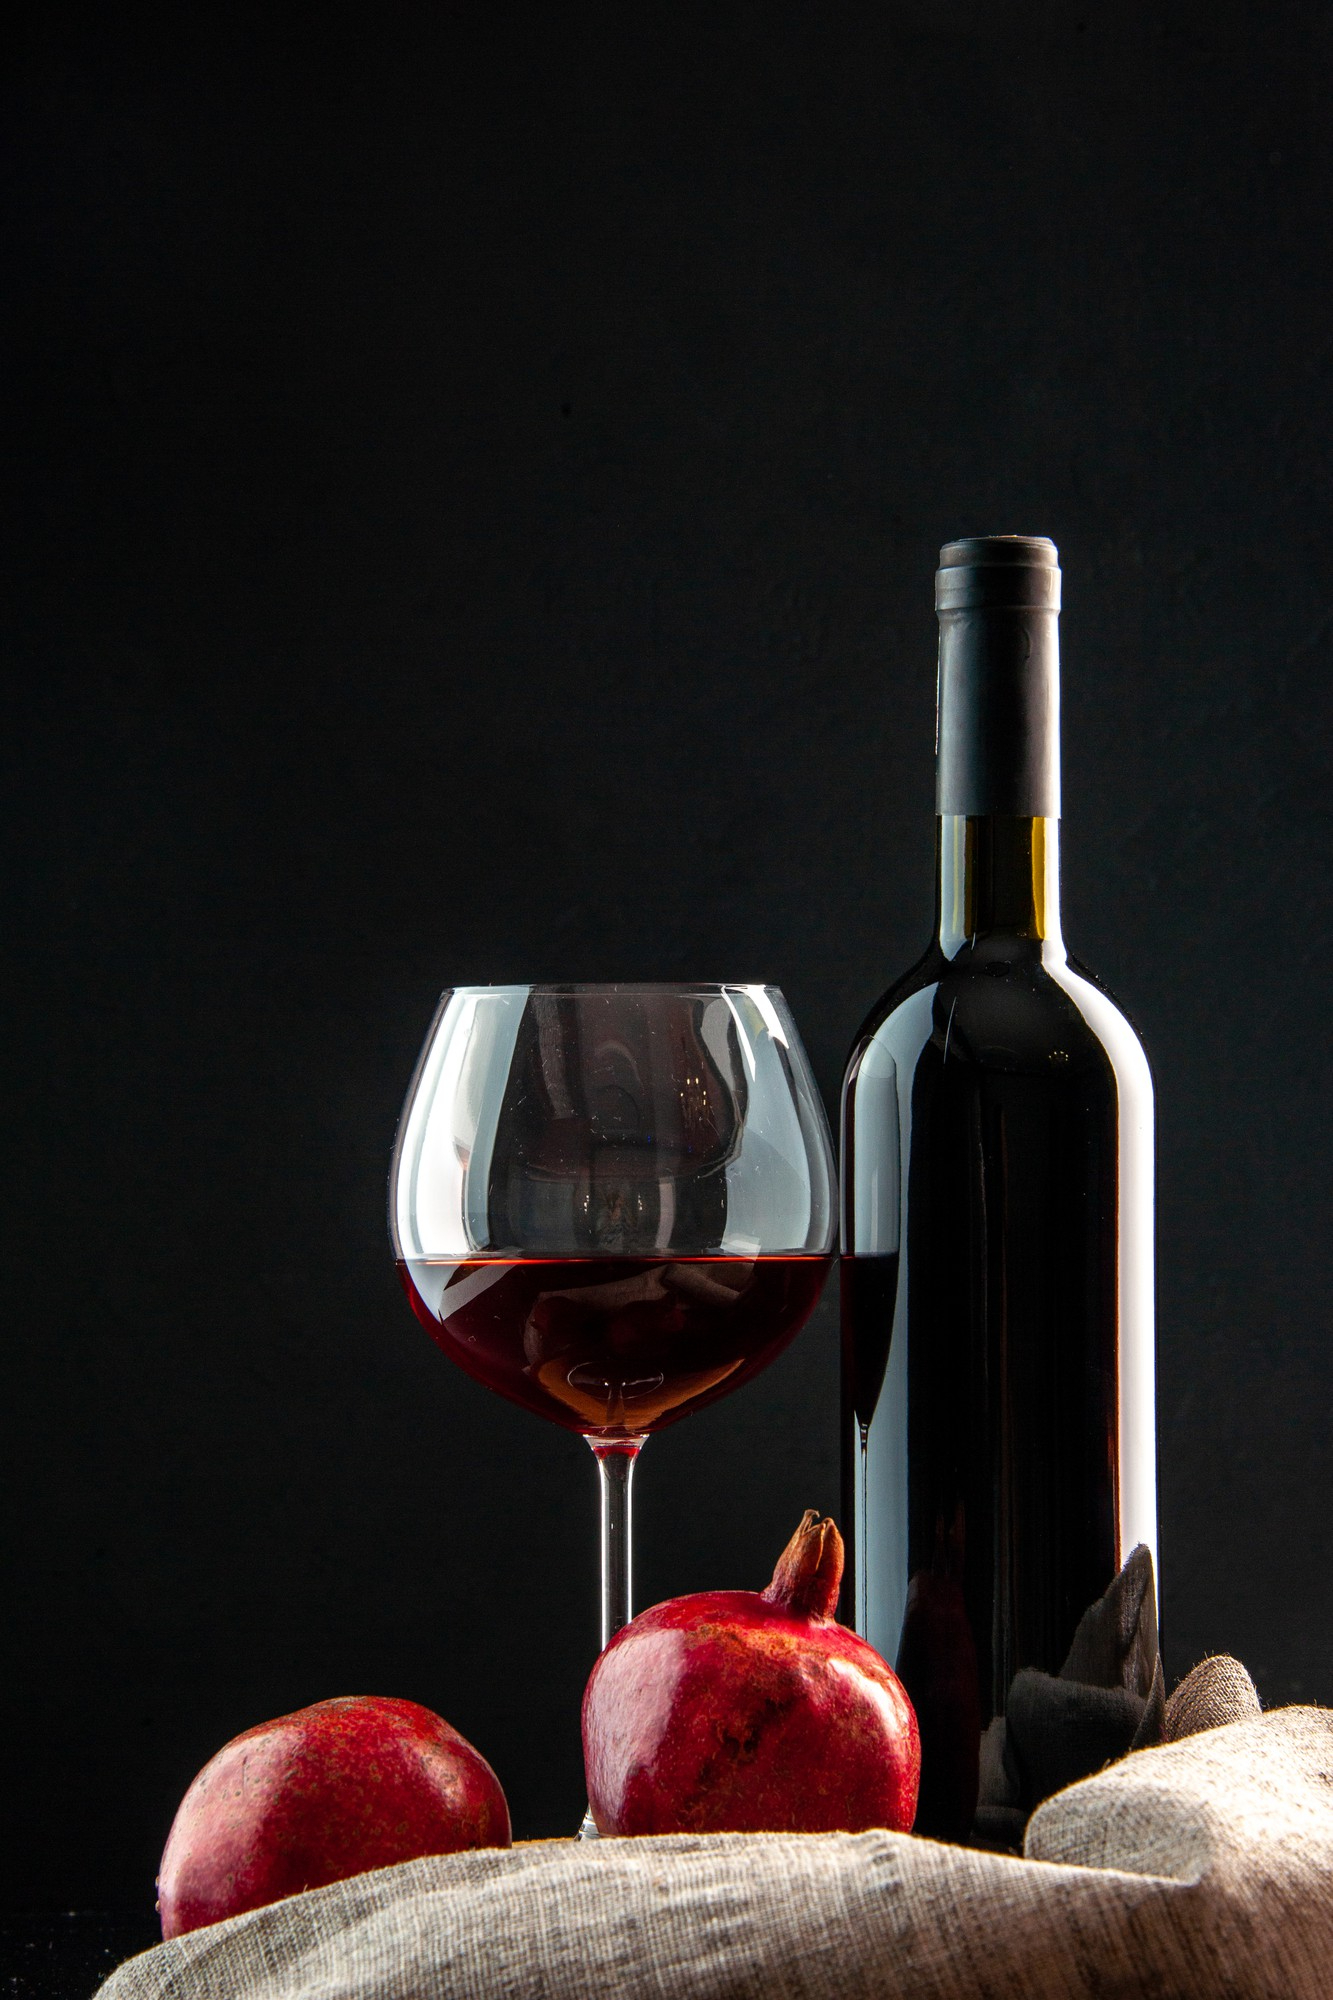 front-view-bottle-wine-with-glass-wine-black-background